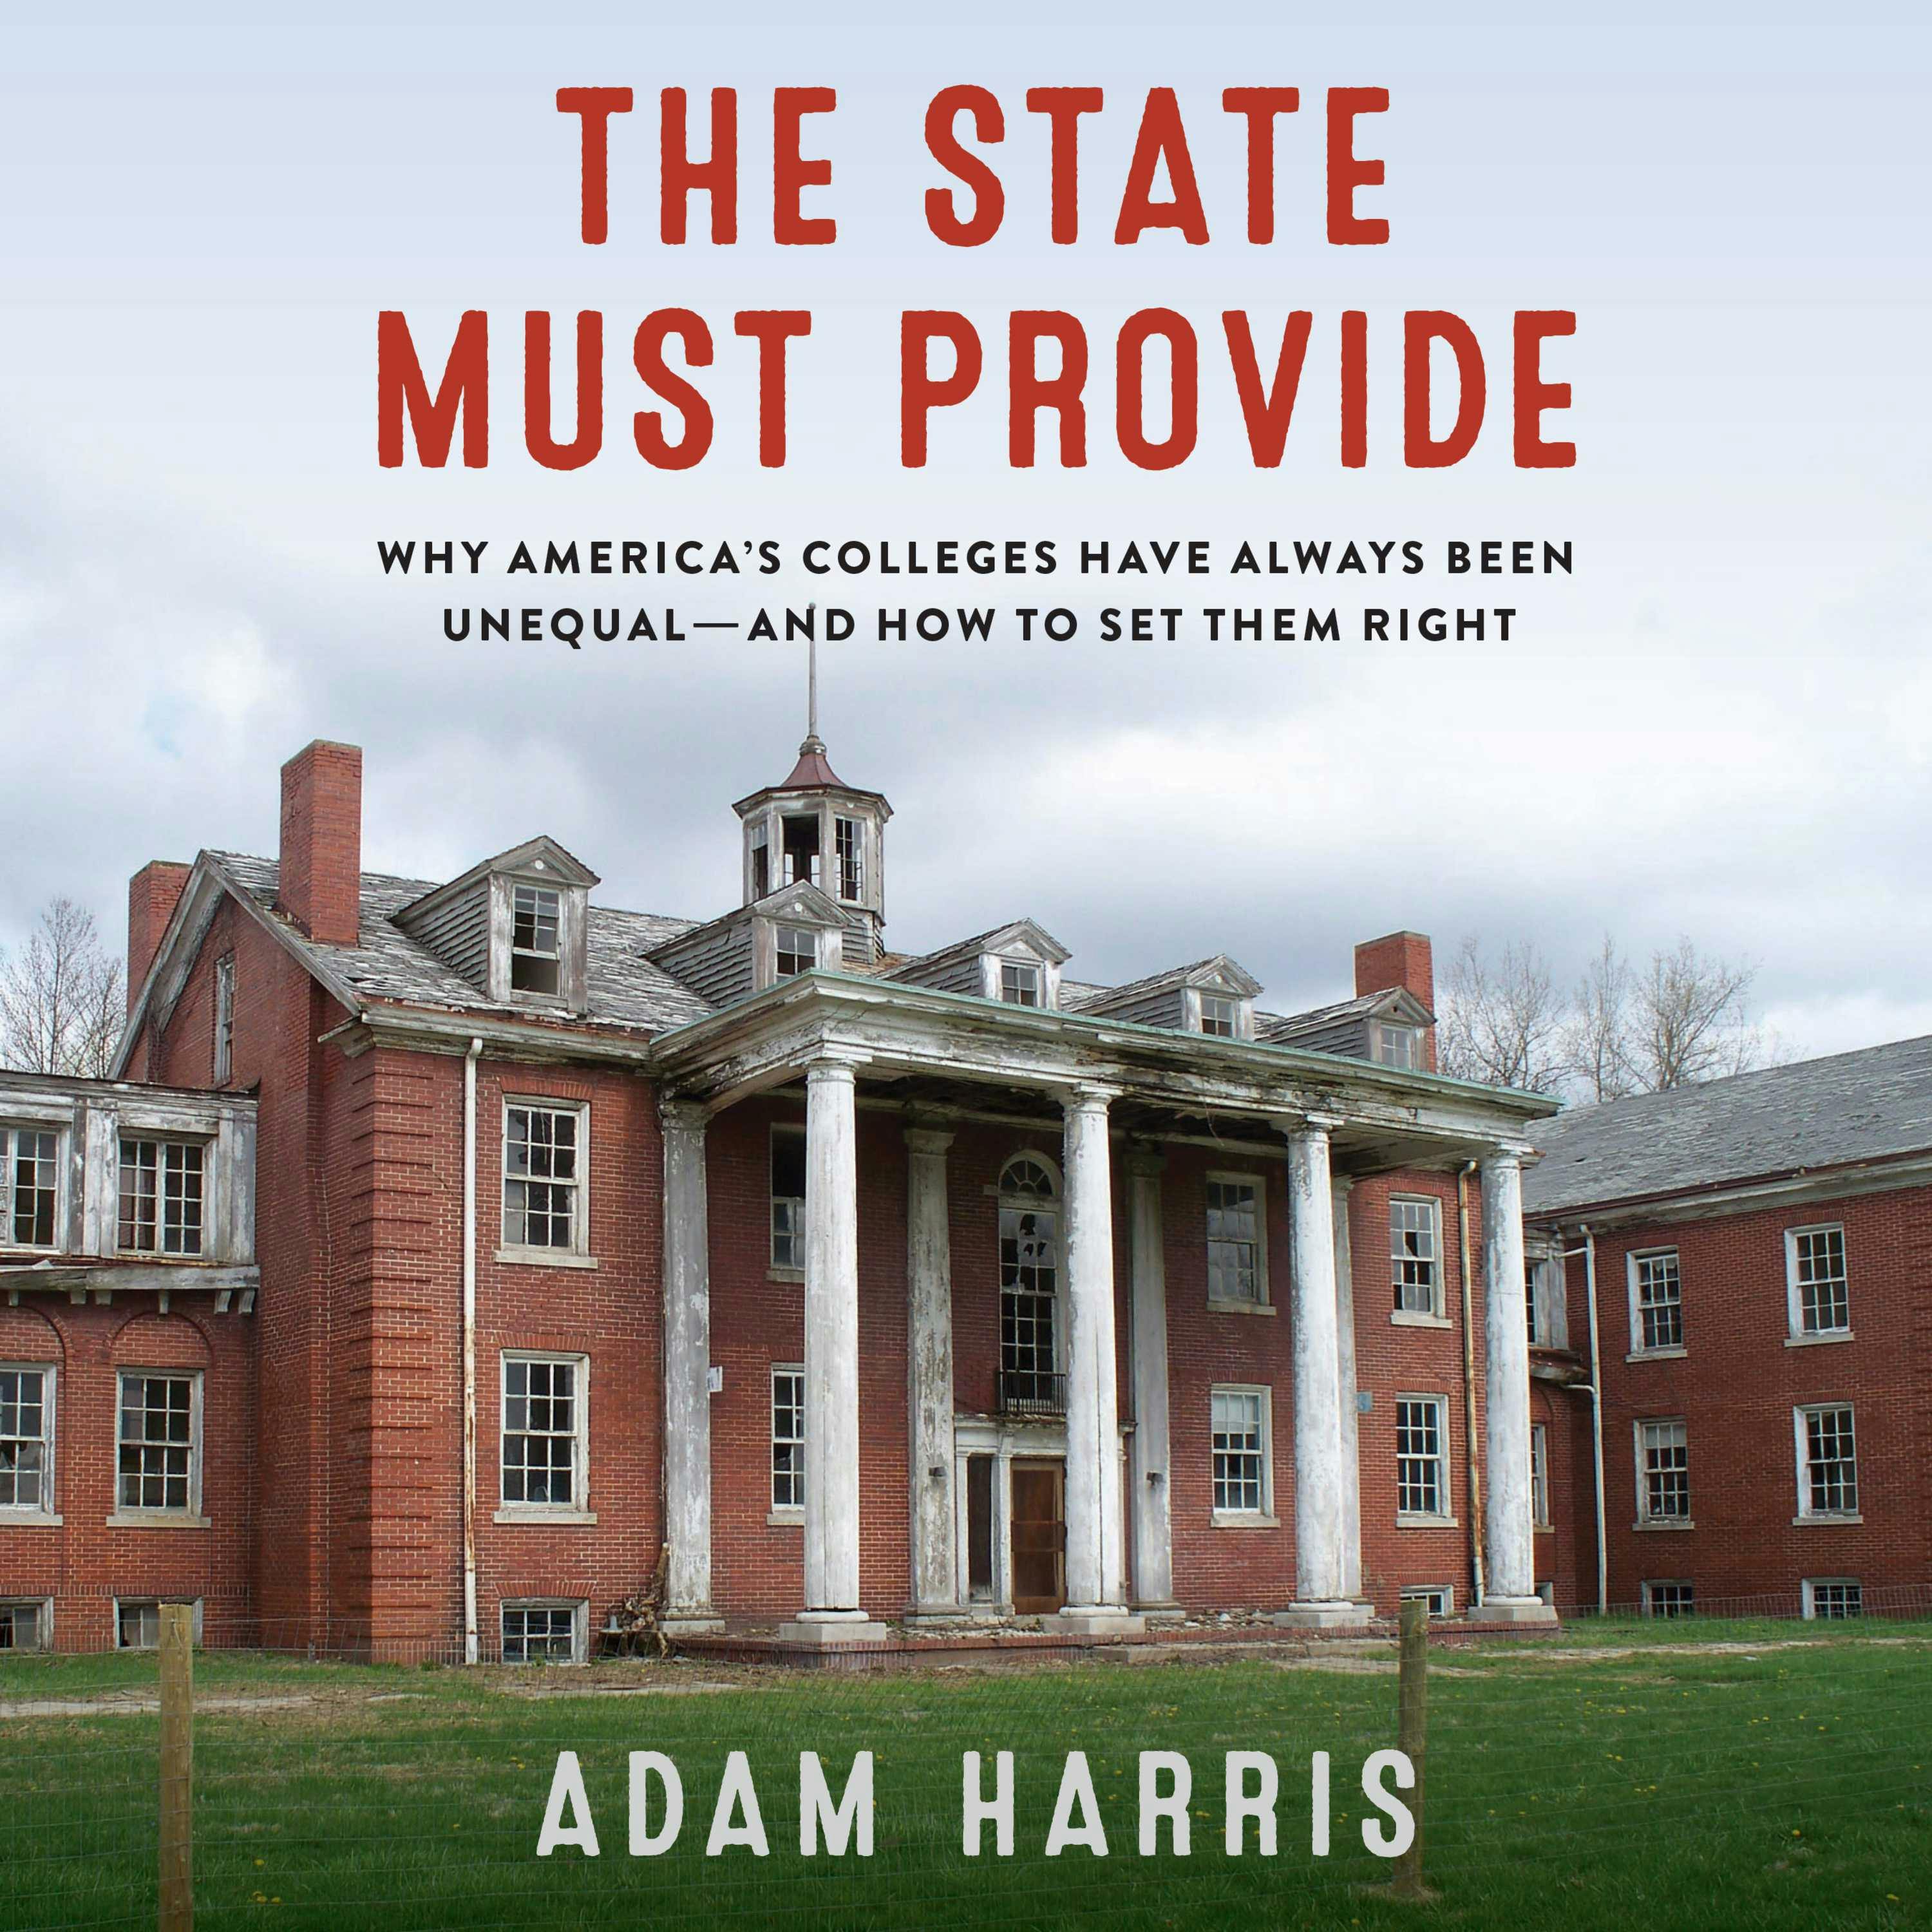 The State Must Provide: Why America's Colleges Have Always Been Unequal--And How to Set Them Right - Adam Harris